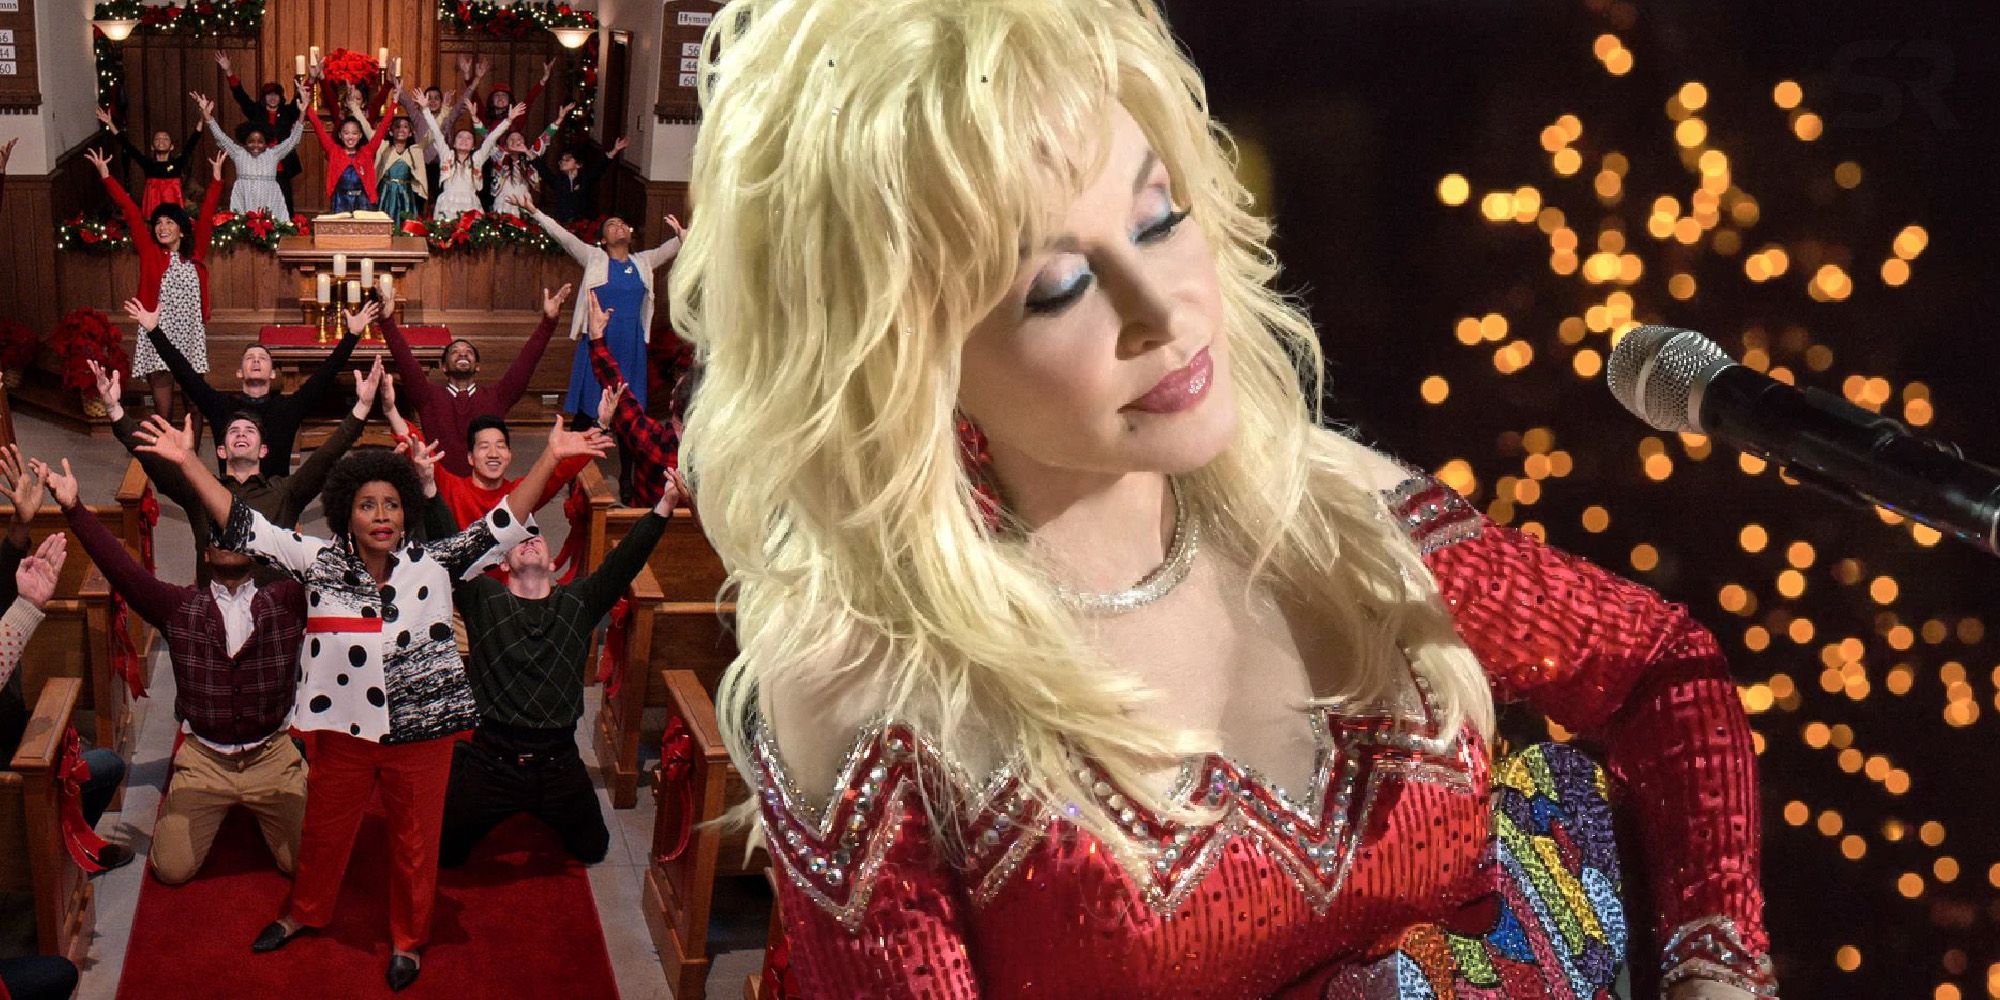 Dolly parton christmas on the square songs best to worst